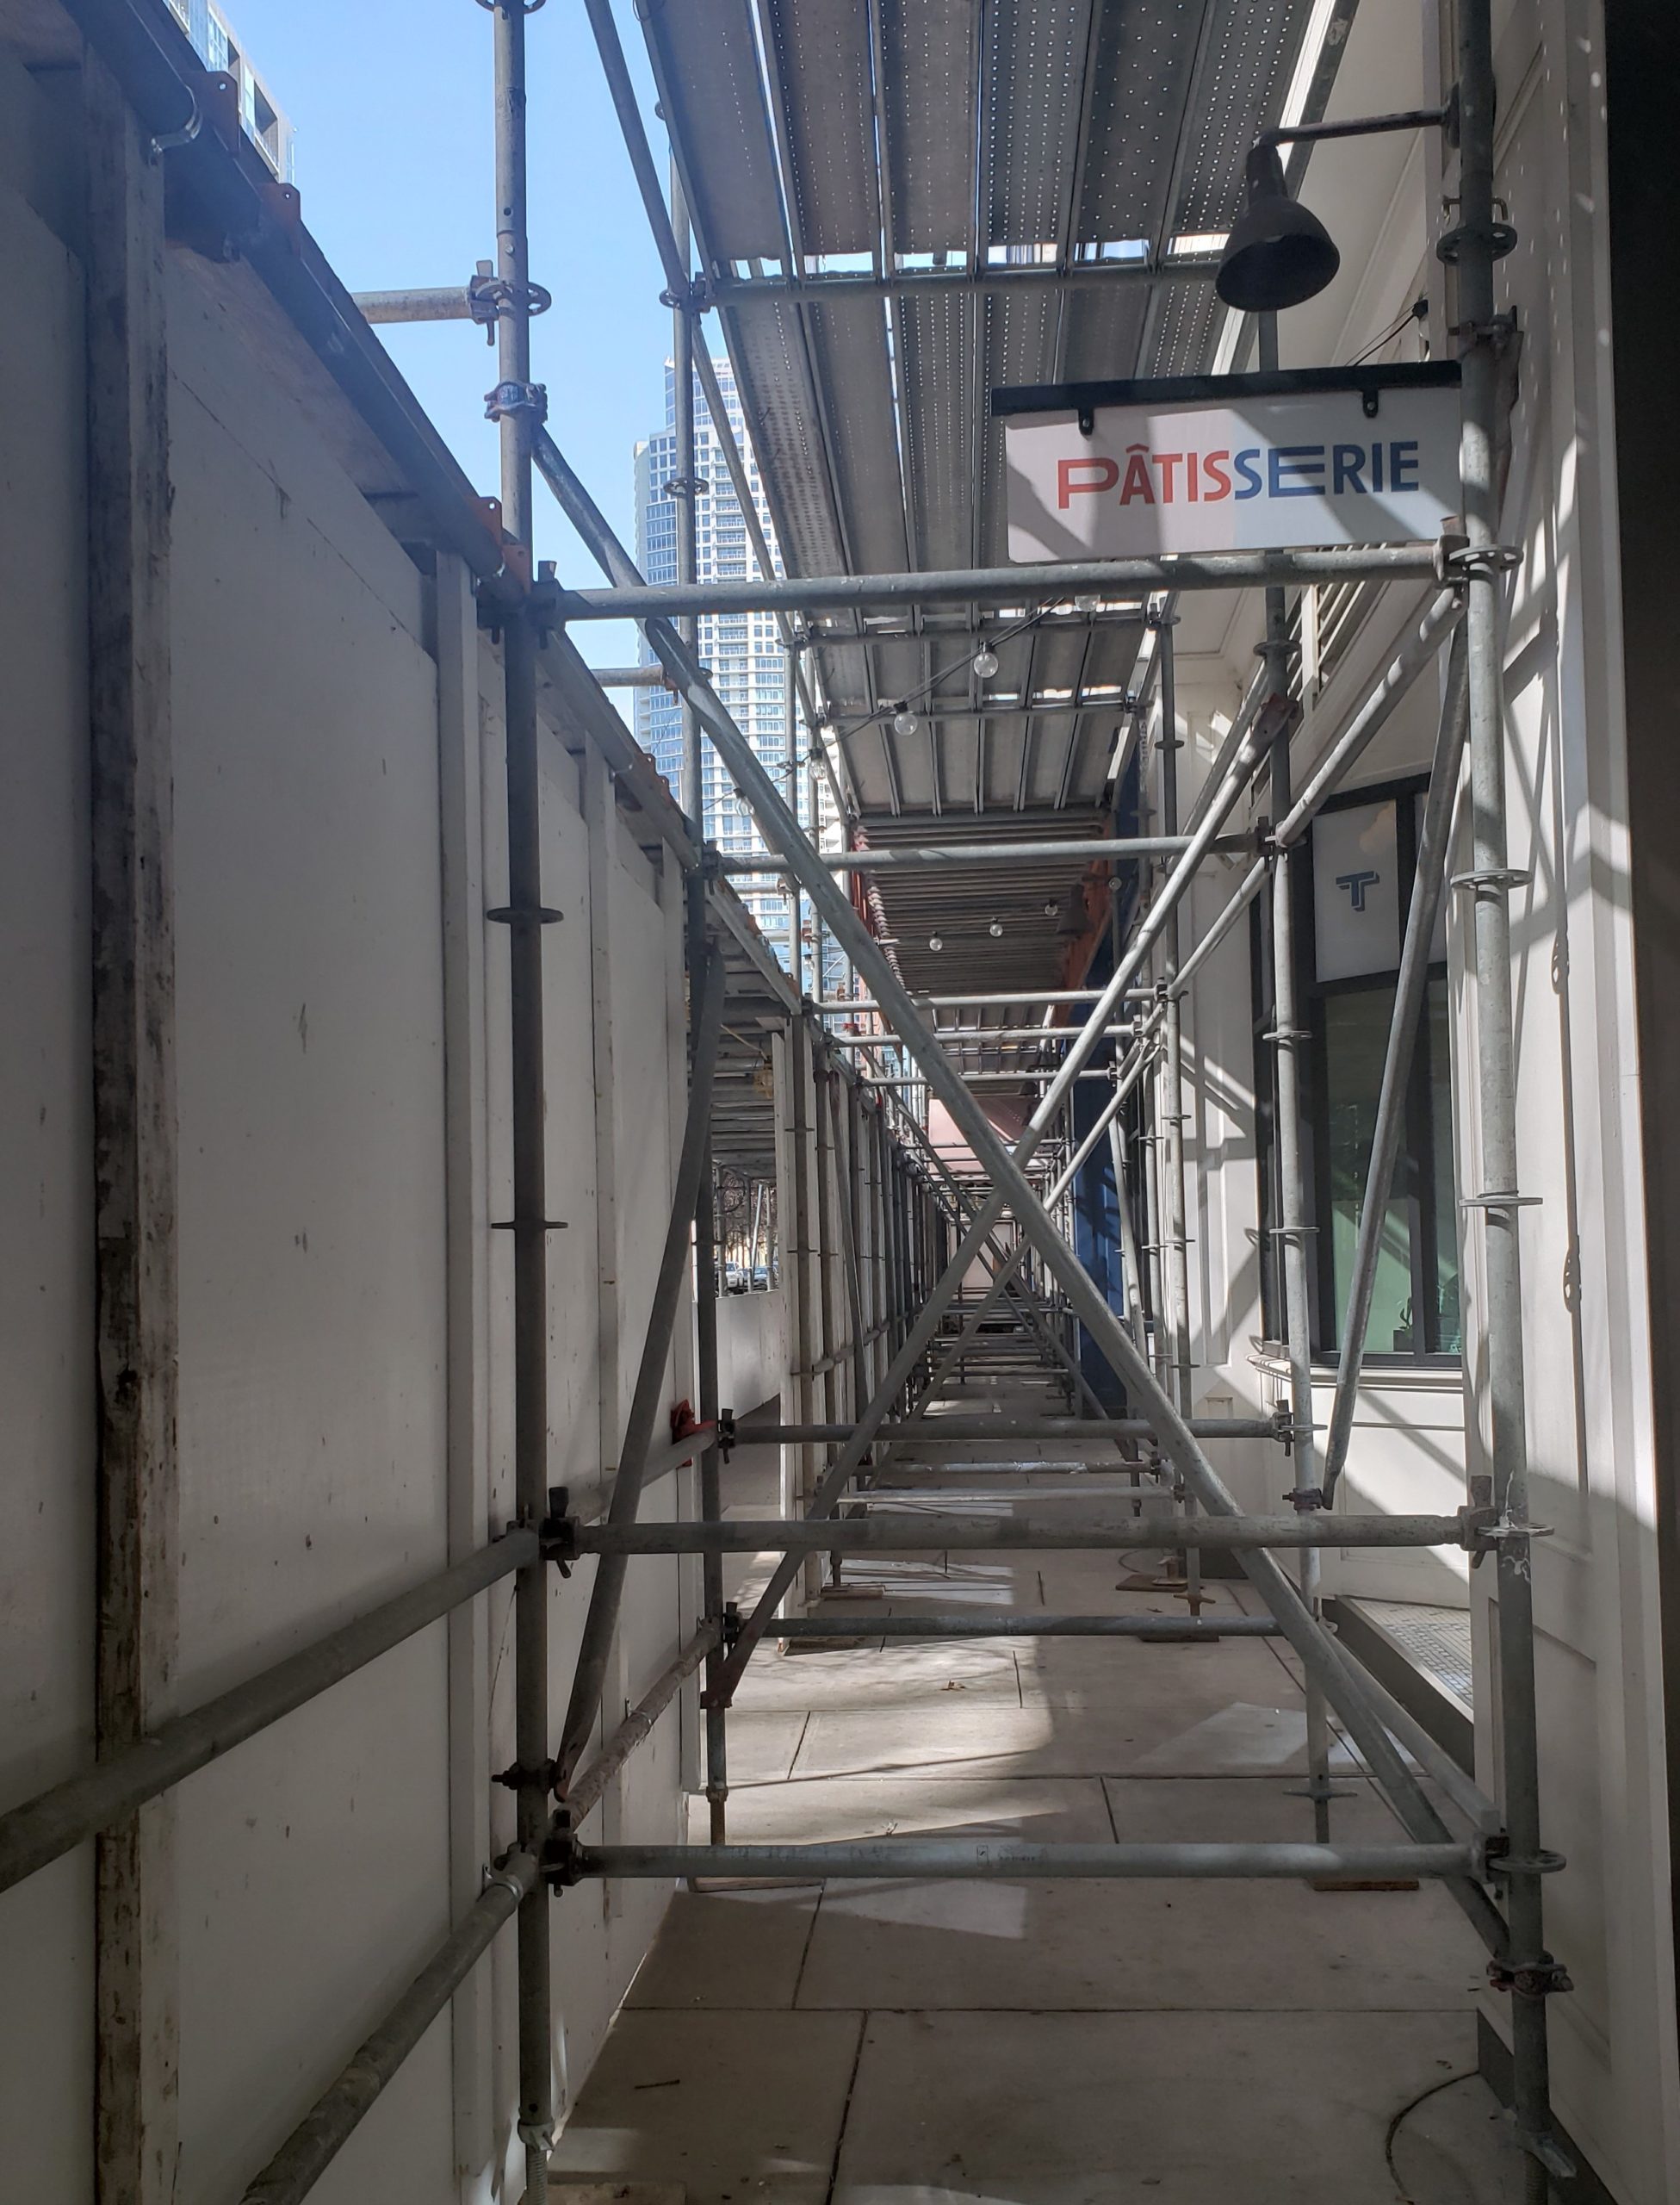 manual track system for swing stage scaffold